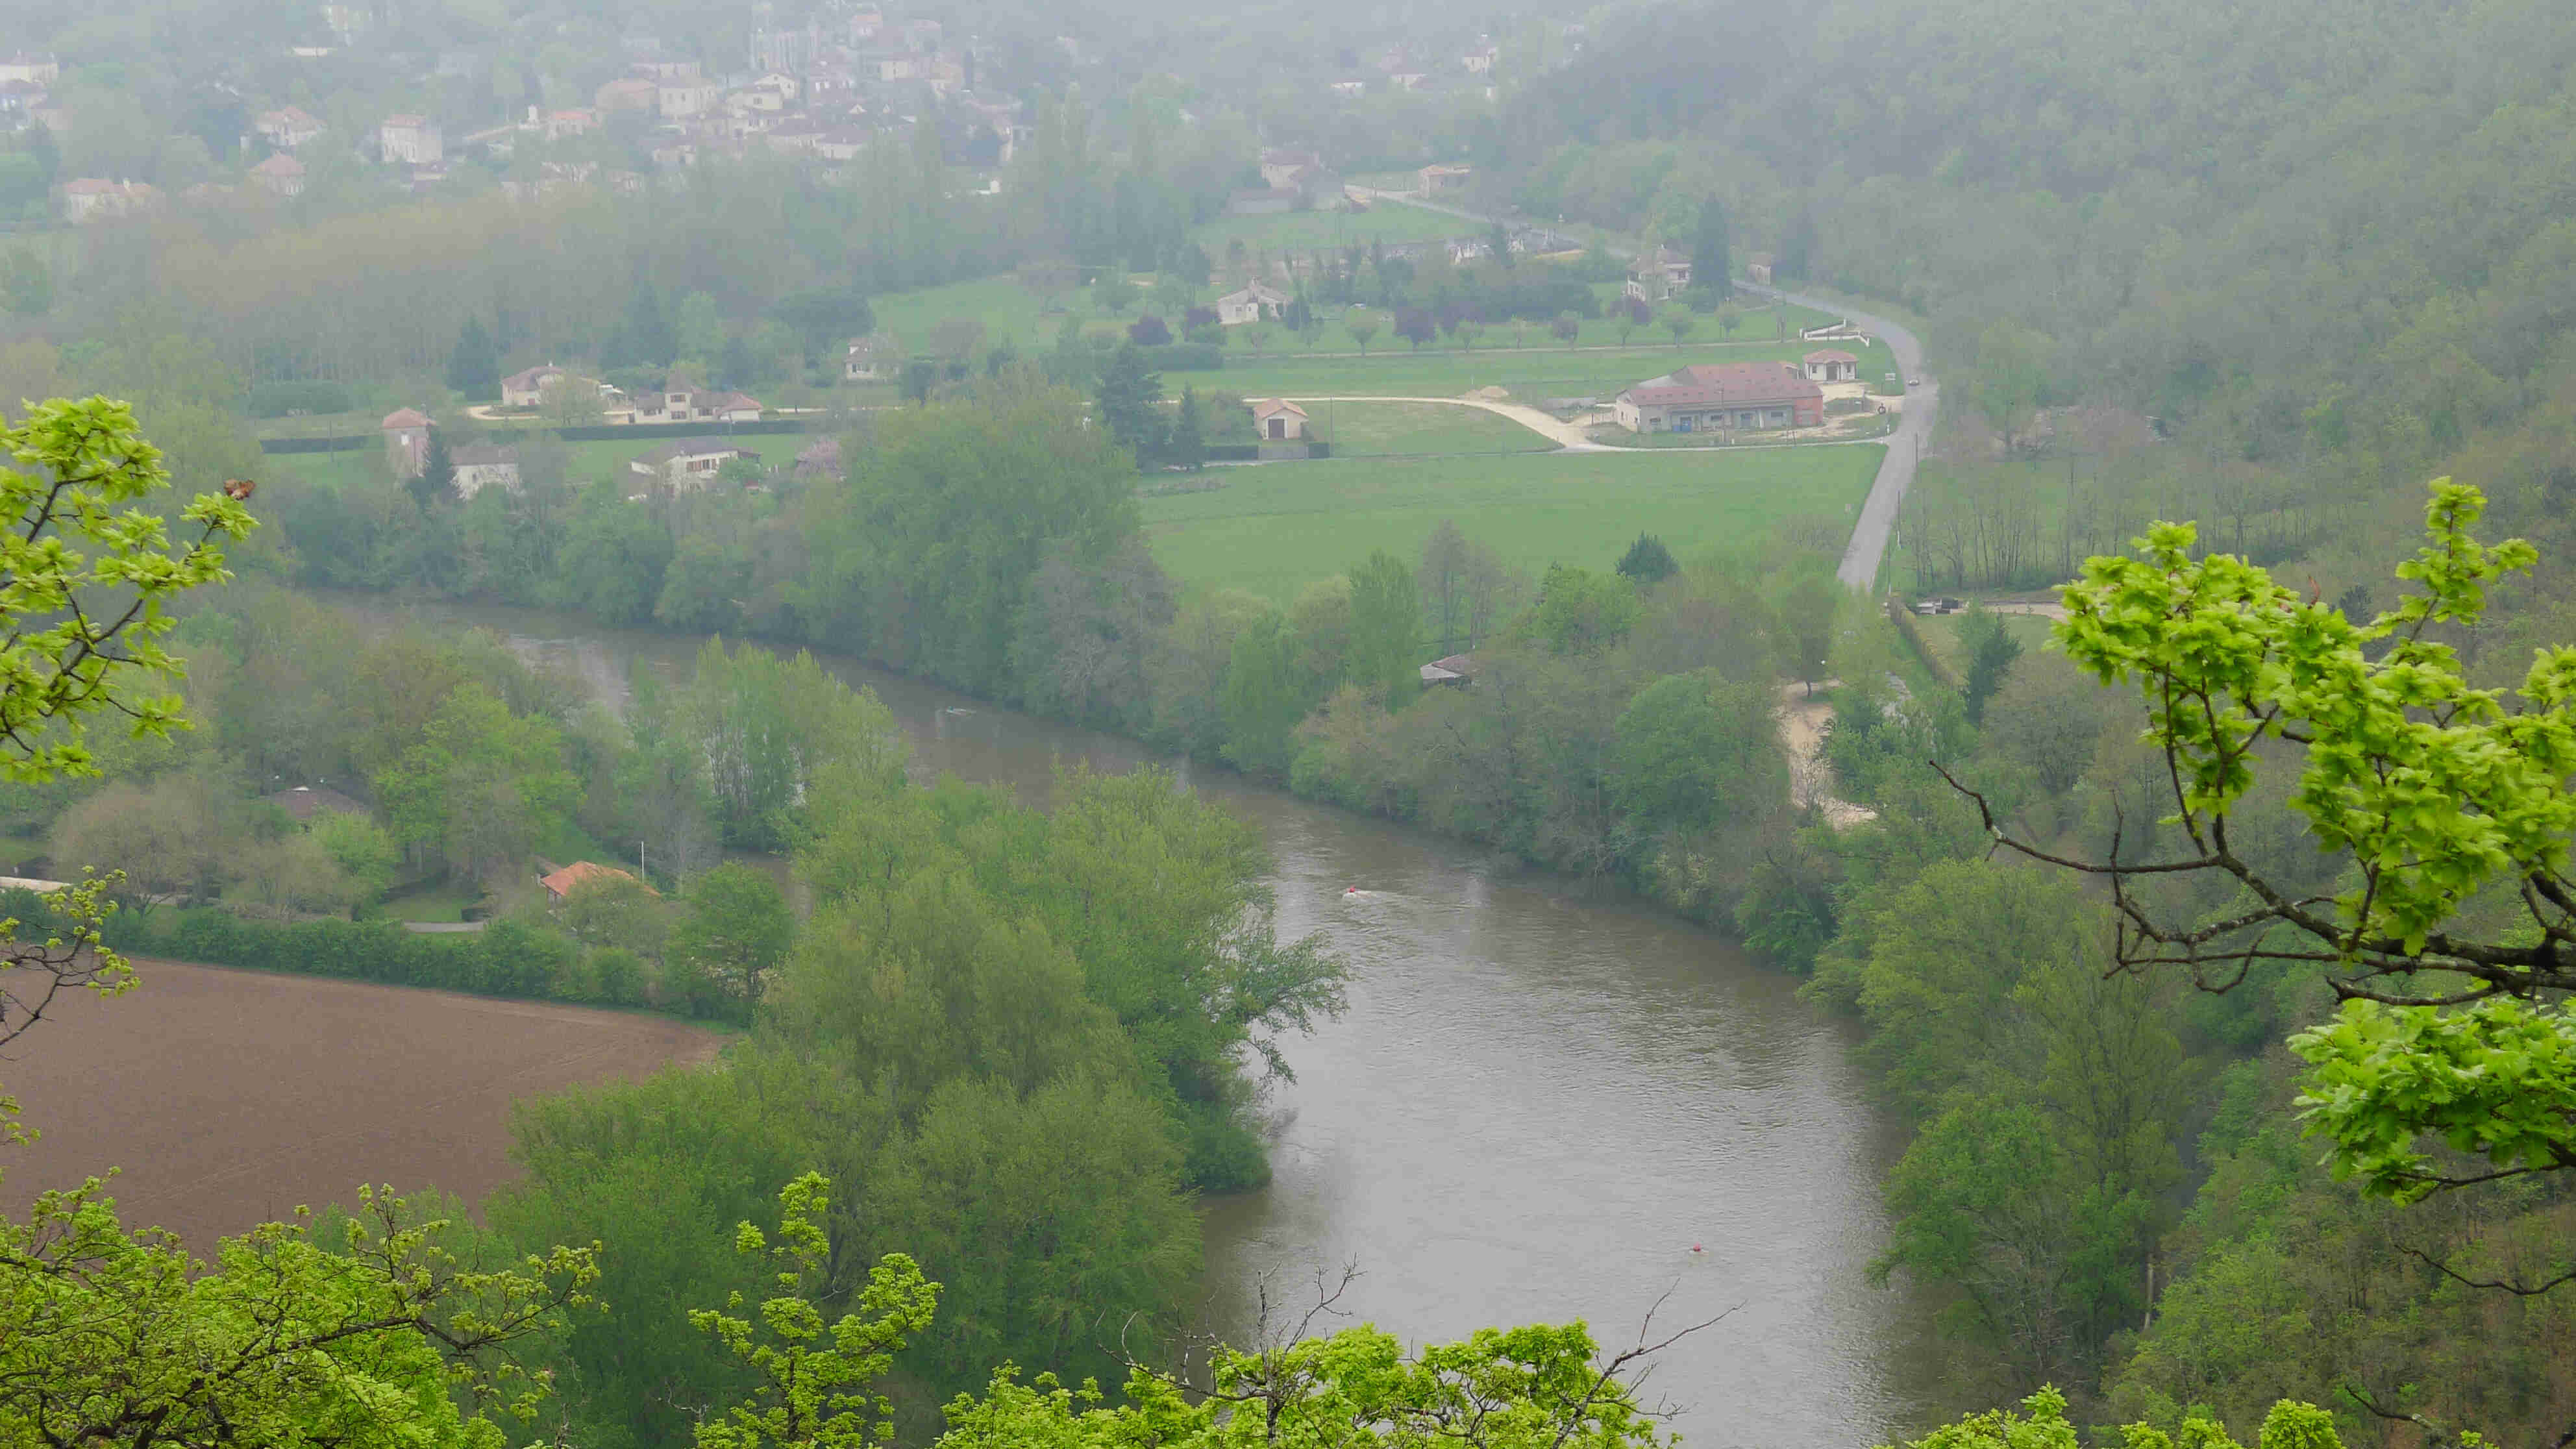 High, downward view of a green river valley, with a town in the background